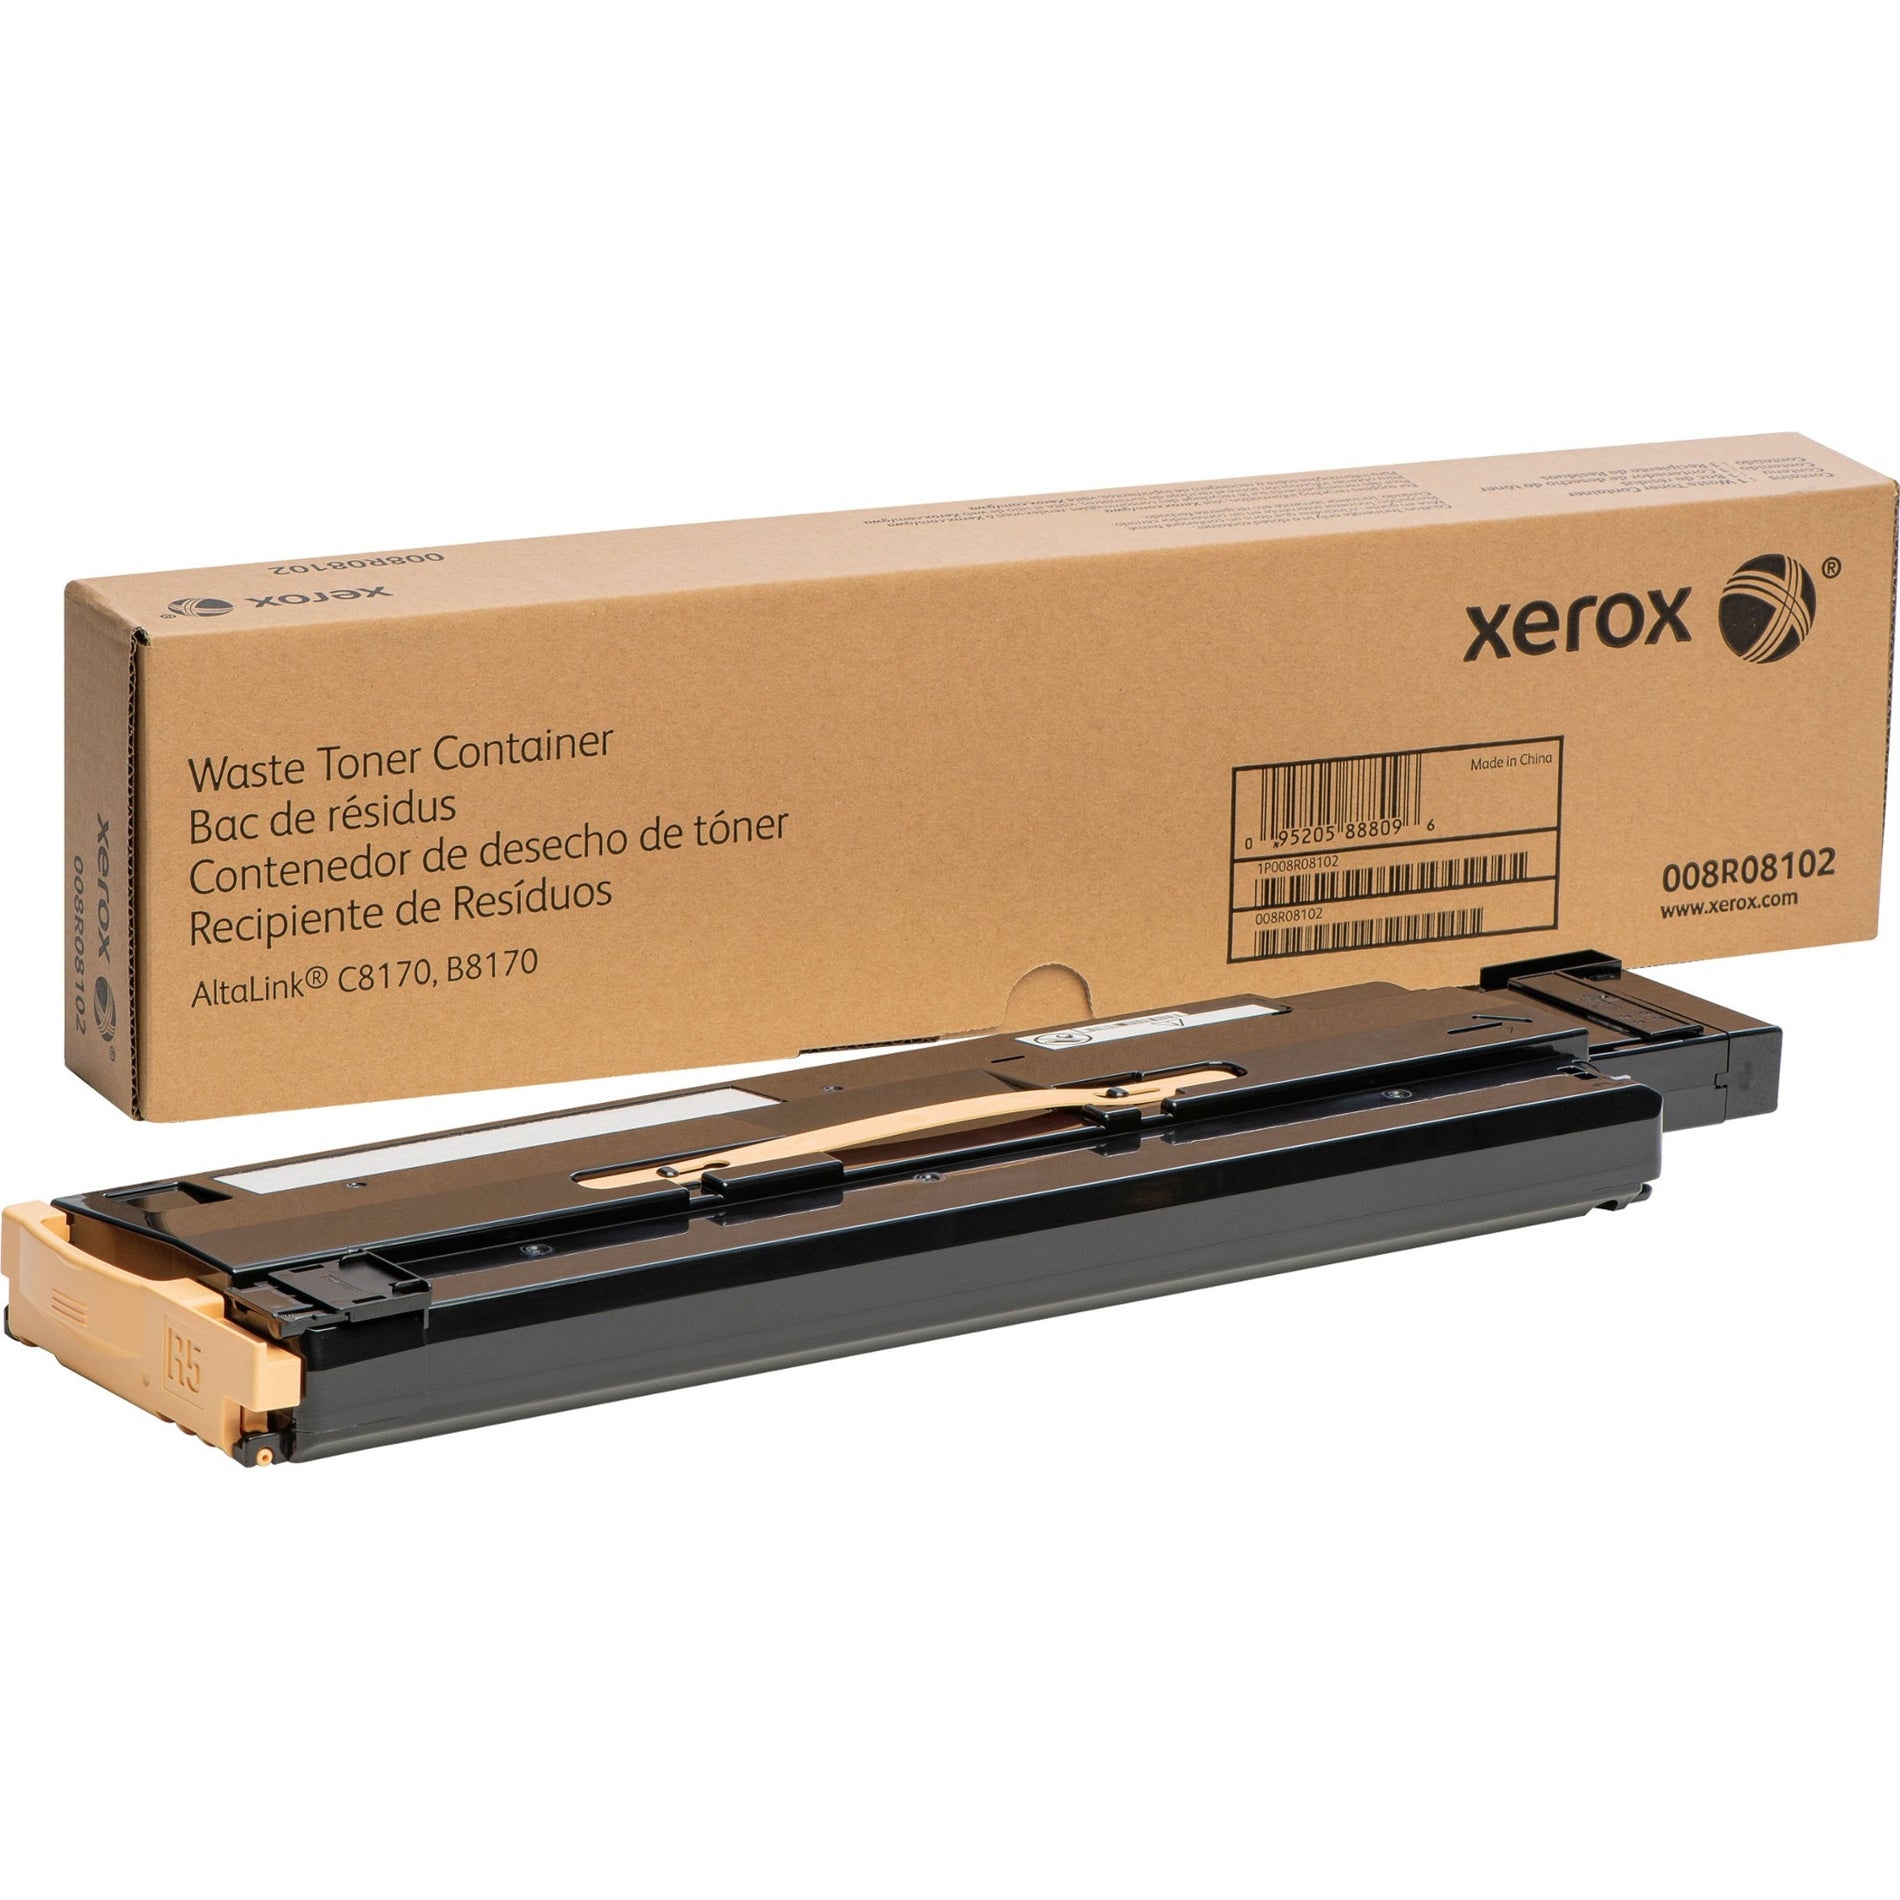 Xerox 008R08102 AL C8170 & B8170 Waste Toner Container, 101,000 Pages